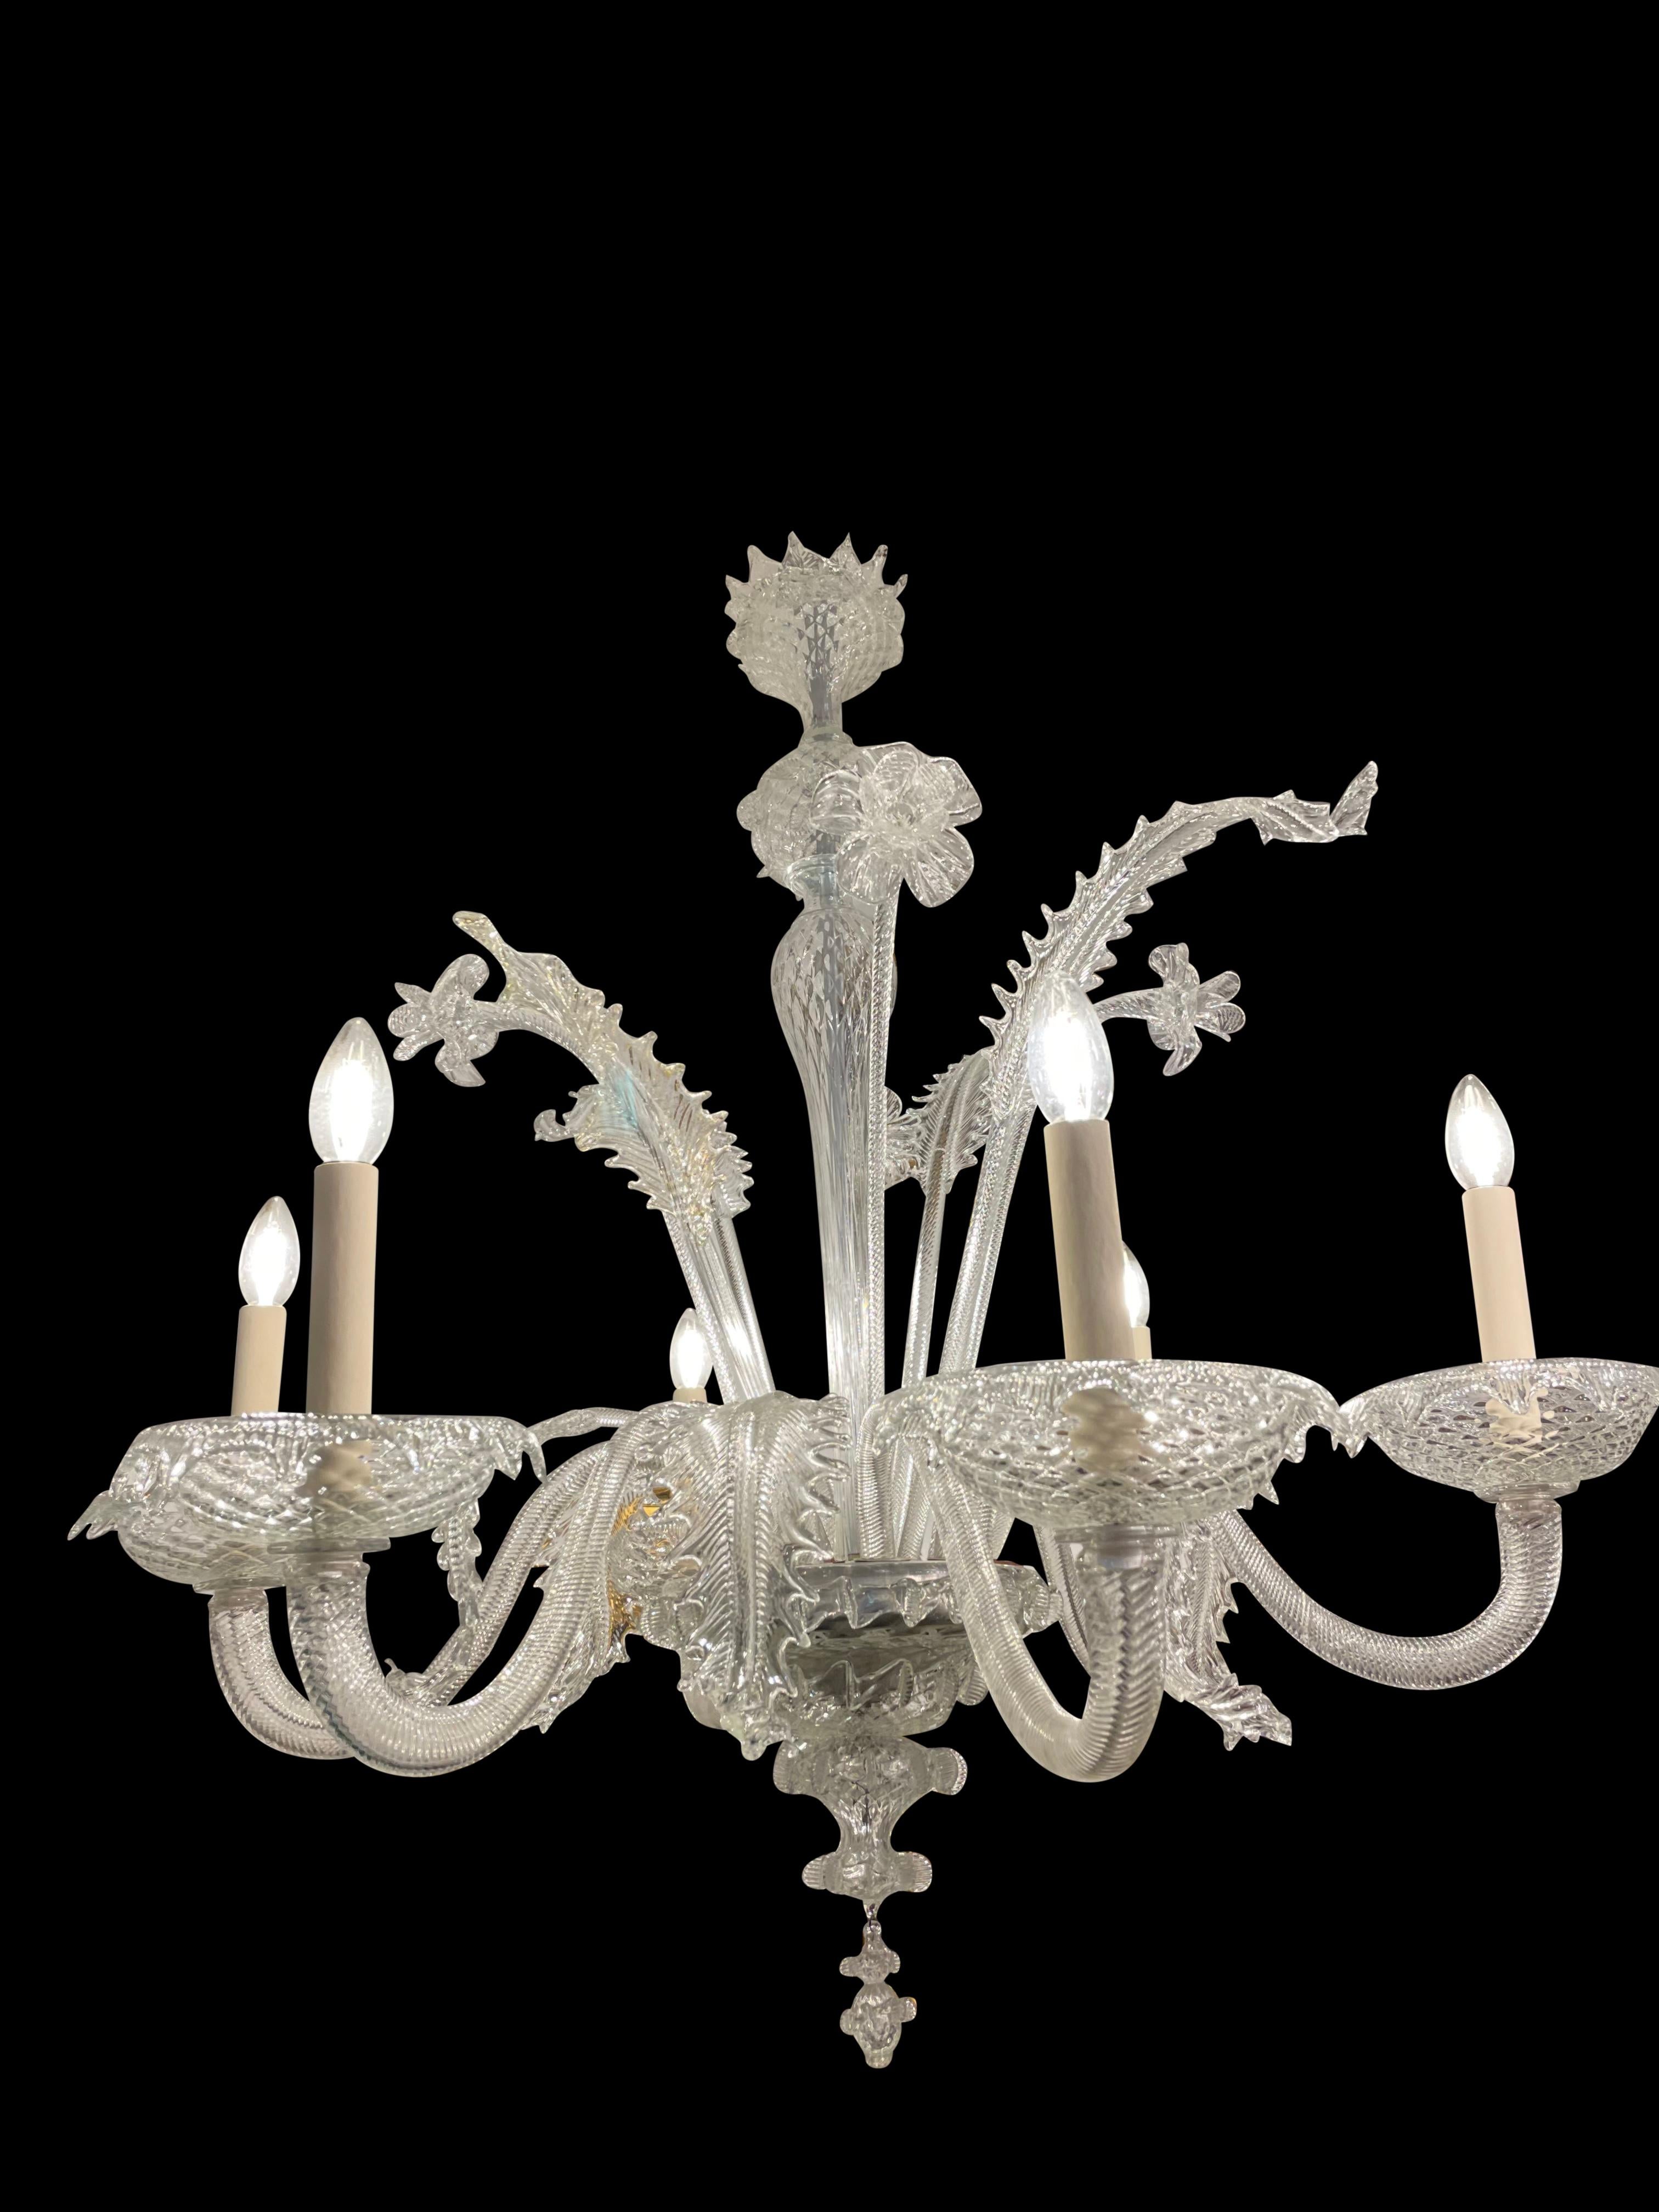 This stylish vintage venetian glass chandelier is beautifully designed with hand blown 